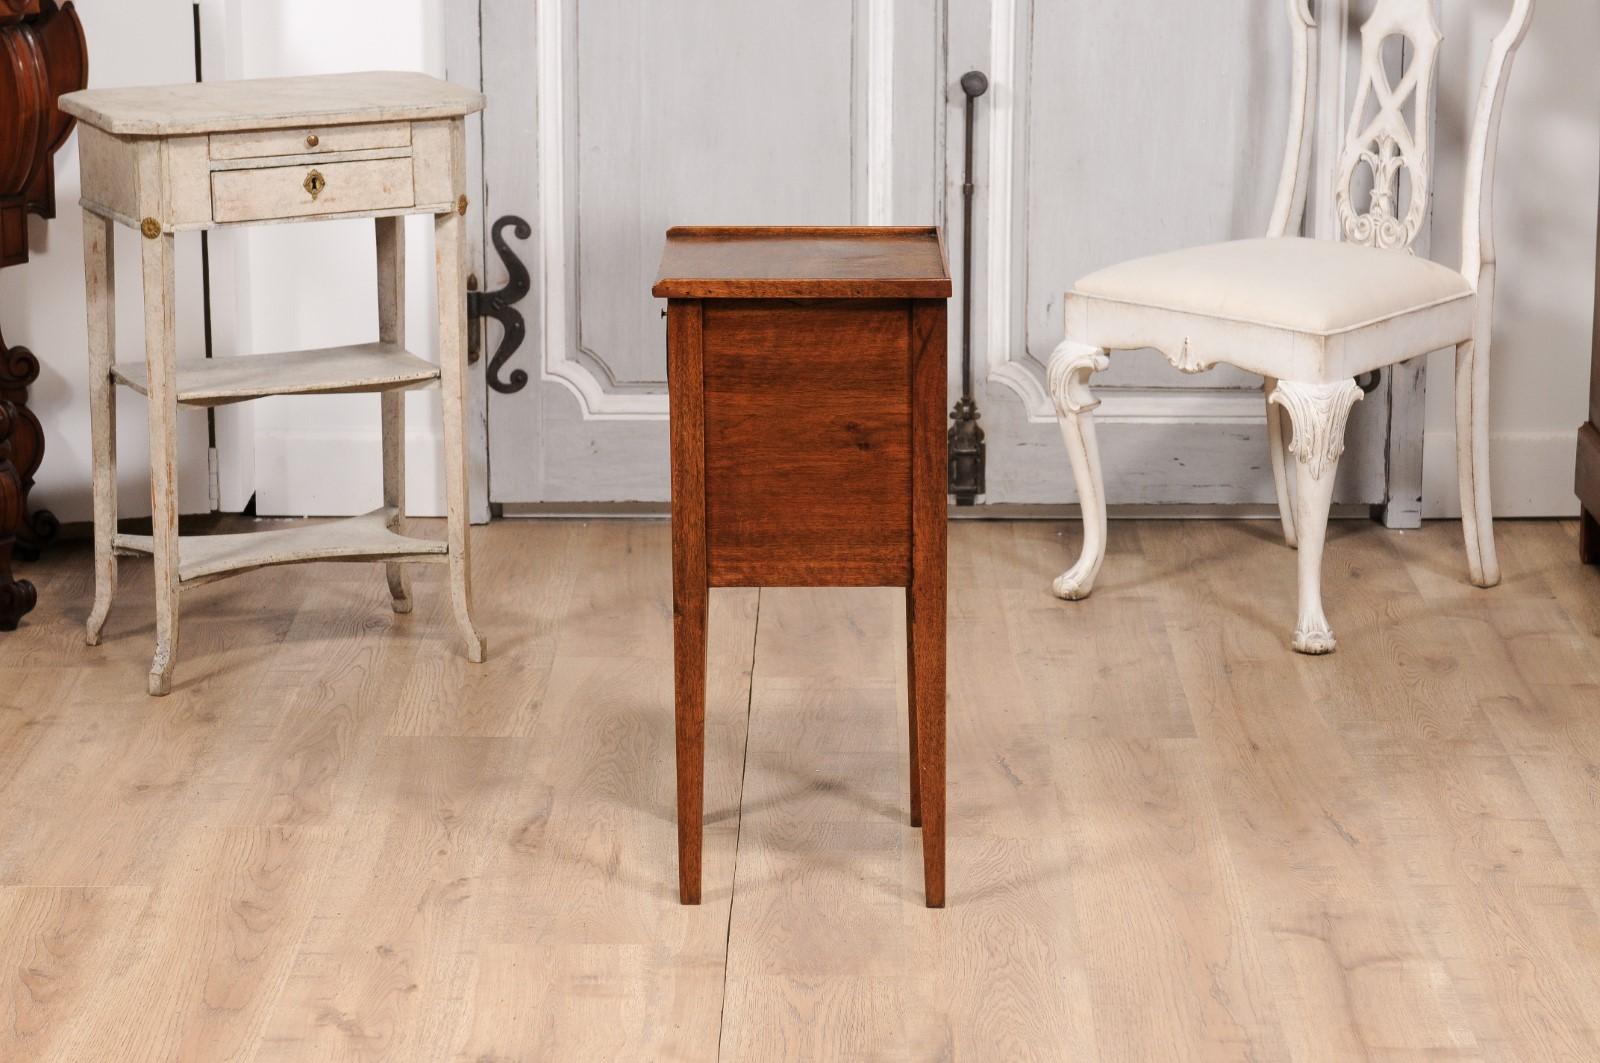 18th Century Italian Walnut Bedside Table with Single Drawer and Tambour Door For Sale 7